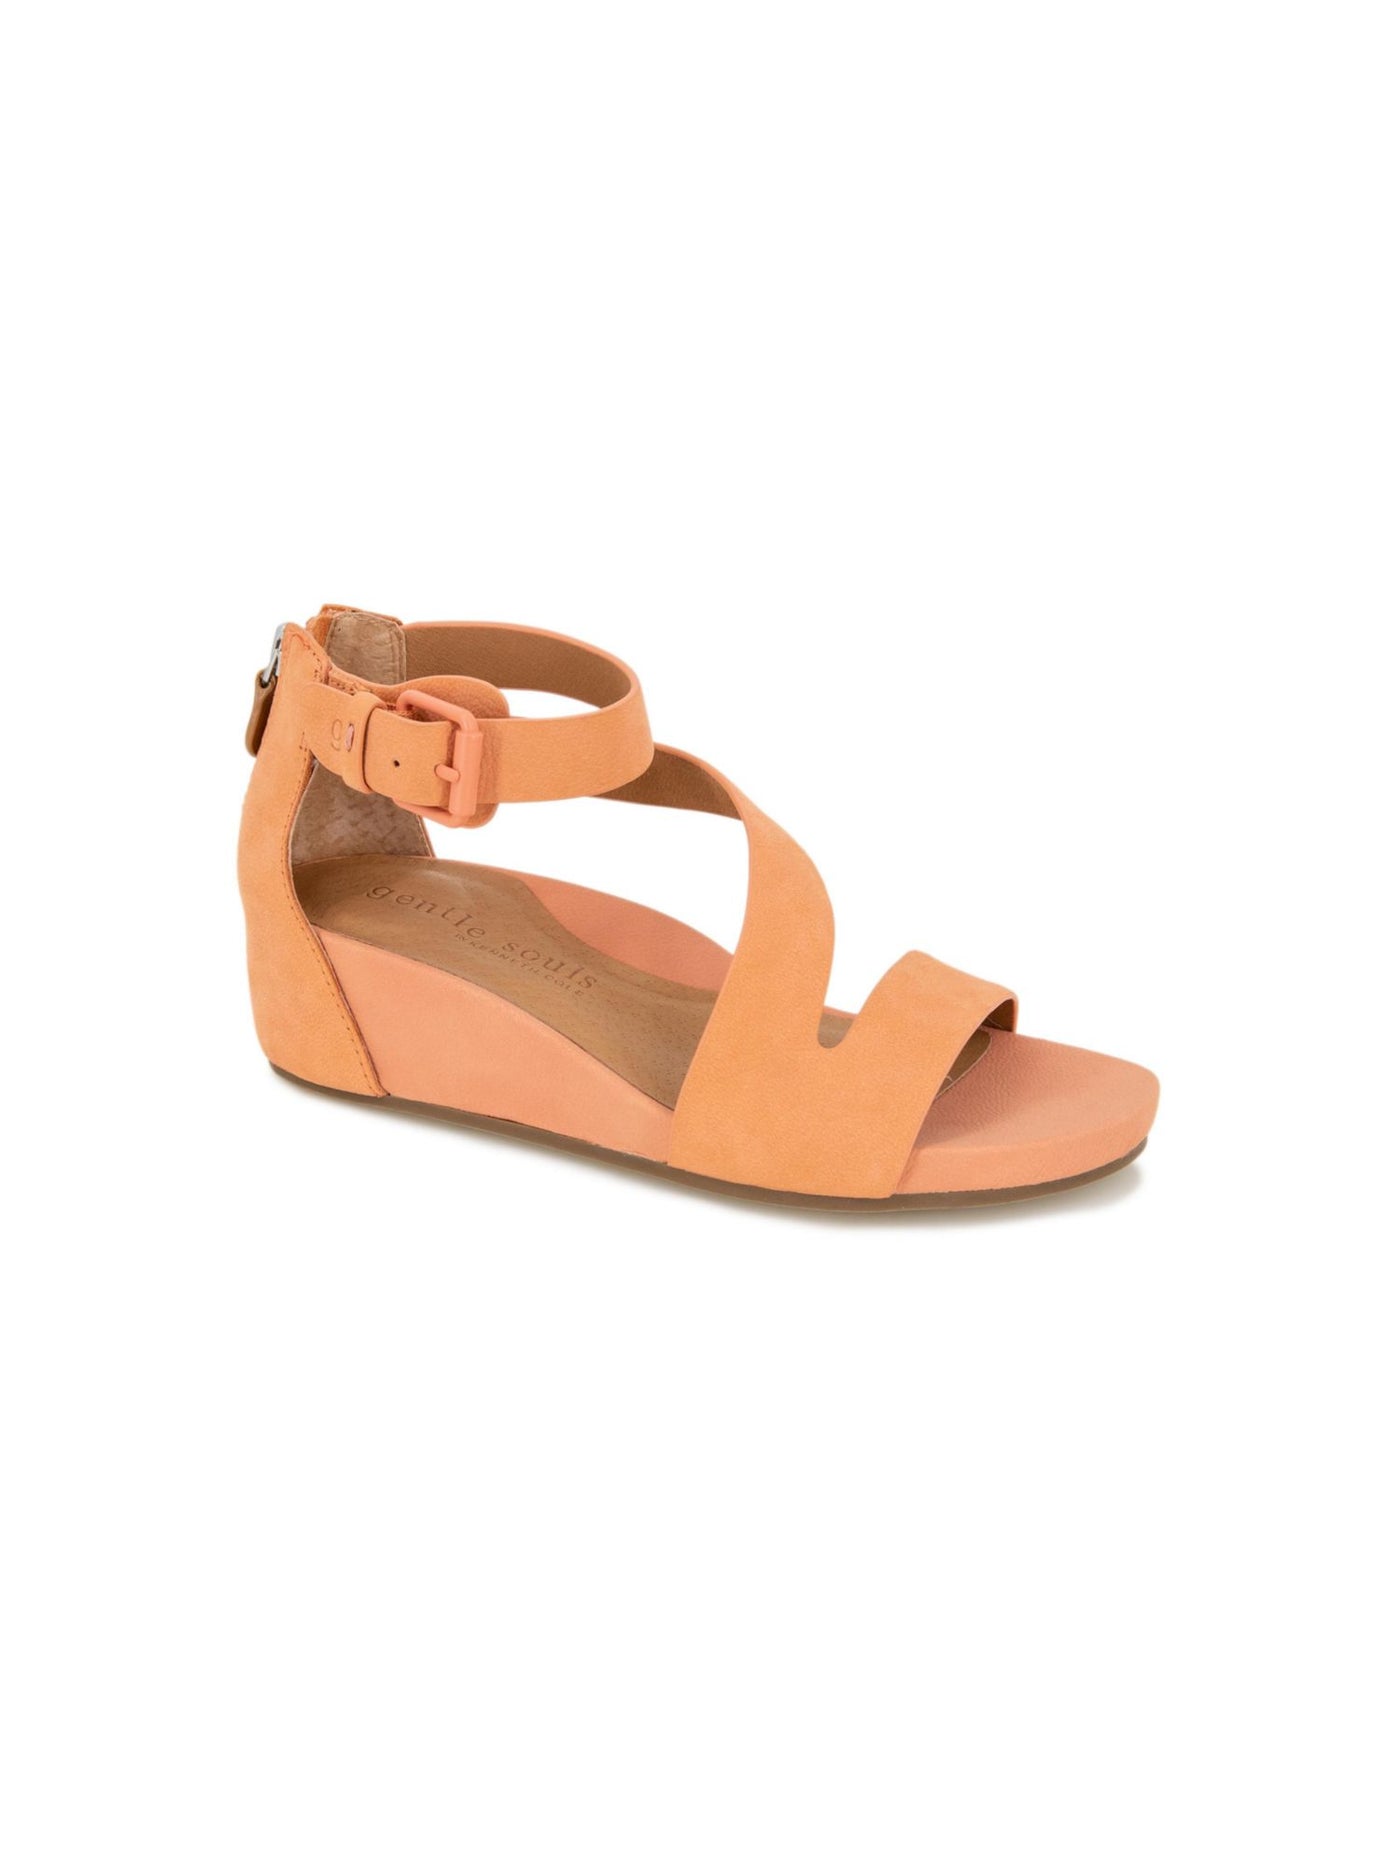 GENTLE SOULS KENNETH COLE Womens Orange Adjustable Ankle Strap Goring Asymmetrical Padded Gwen Round Toe Wedge Zip-Up Leather Sandals Shoes 9